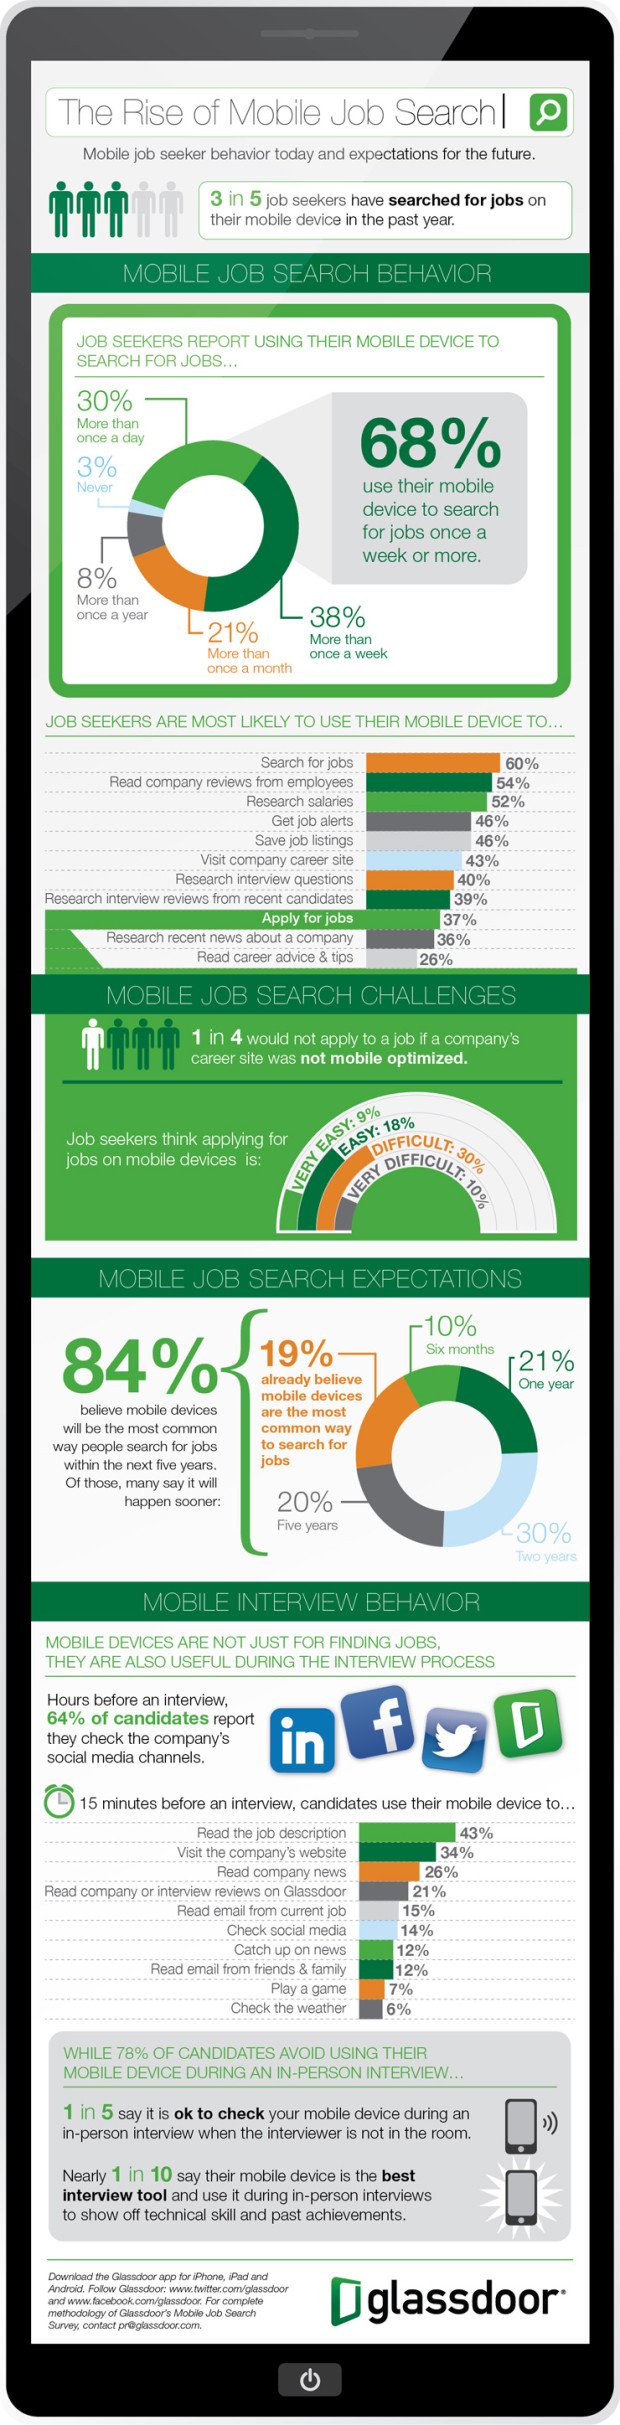 The Rise of Mobile Job SearchInfographic